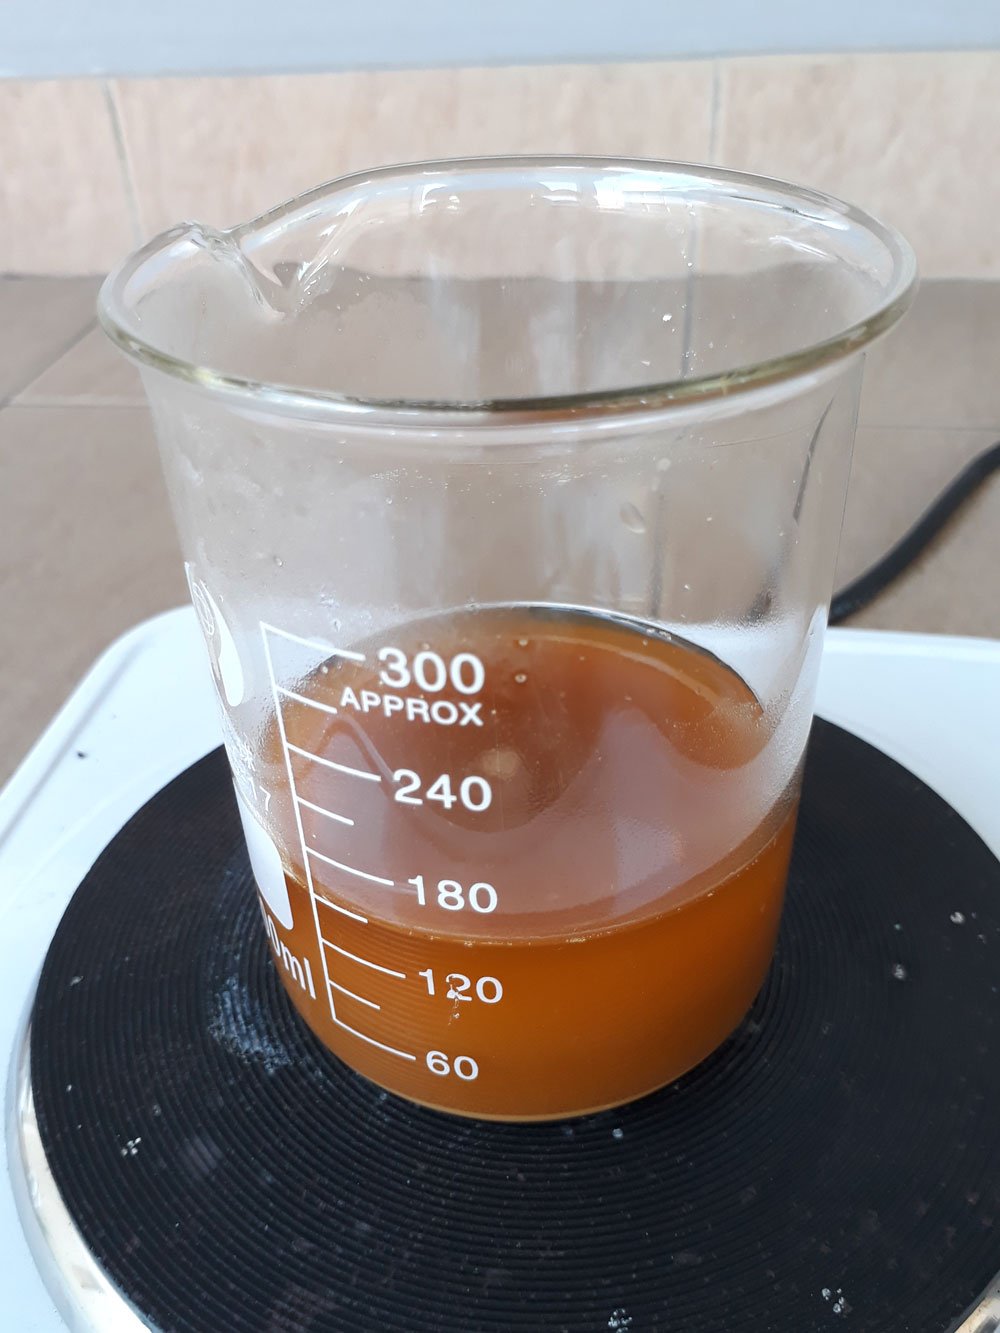 Hydrolysis of iron sulfate turns the solution brown.